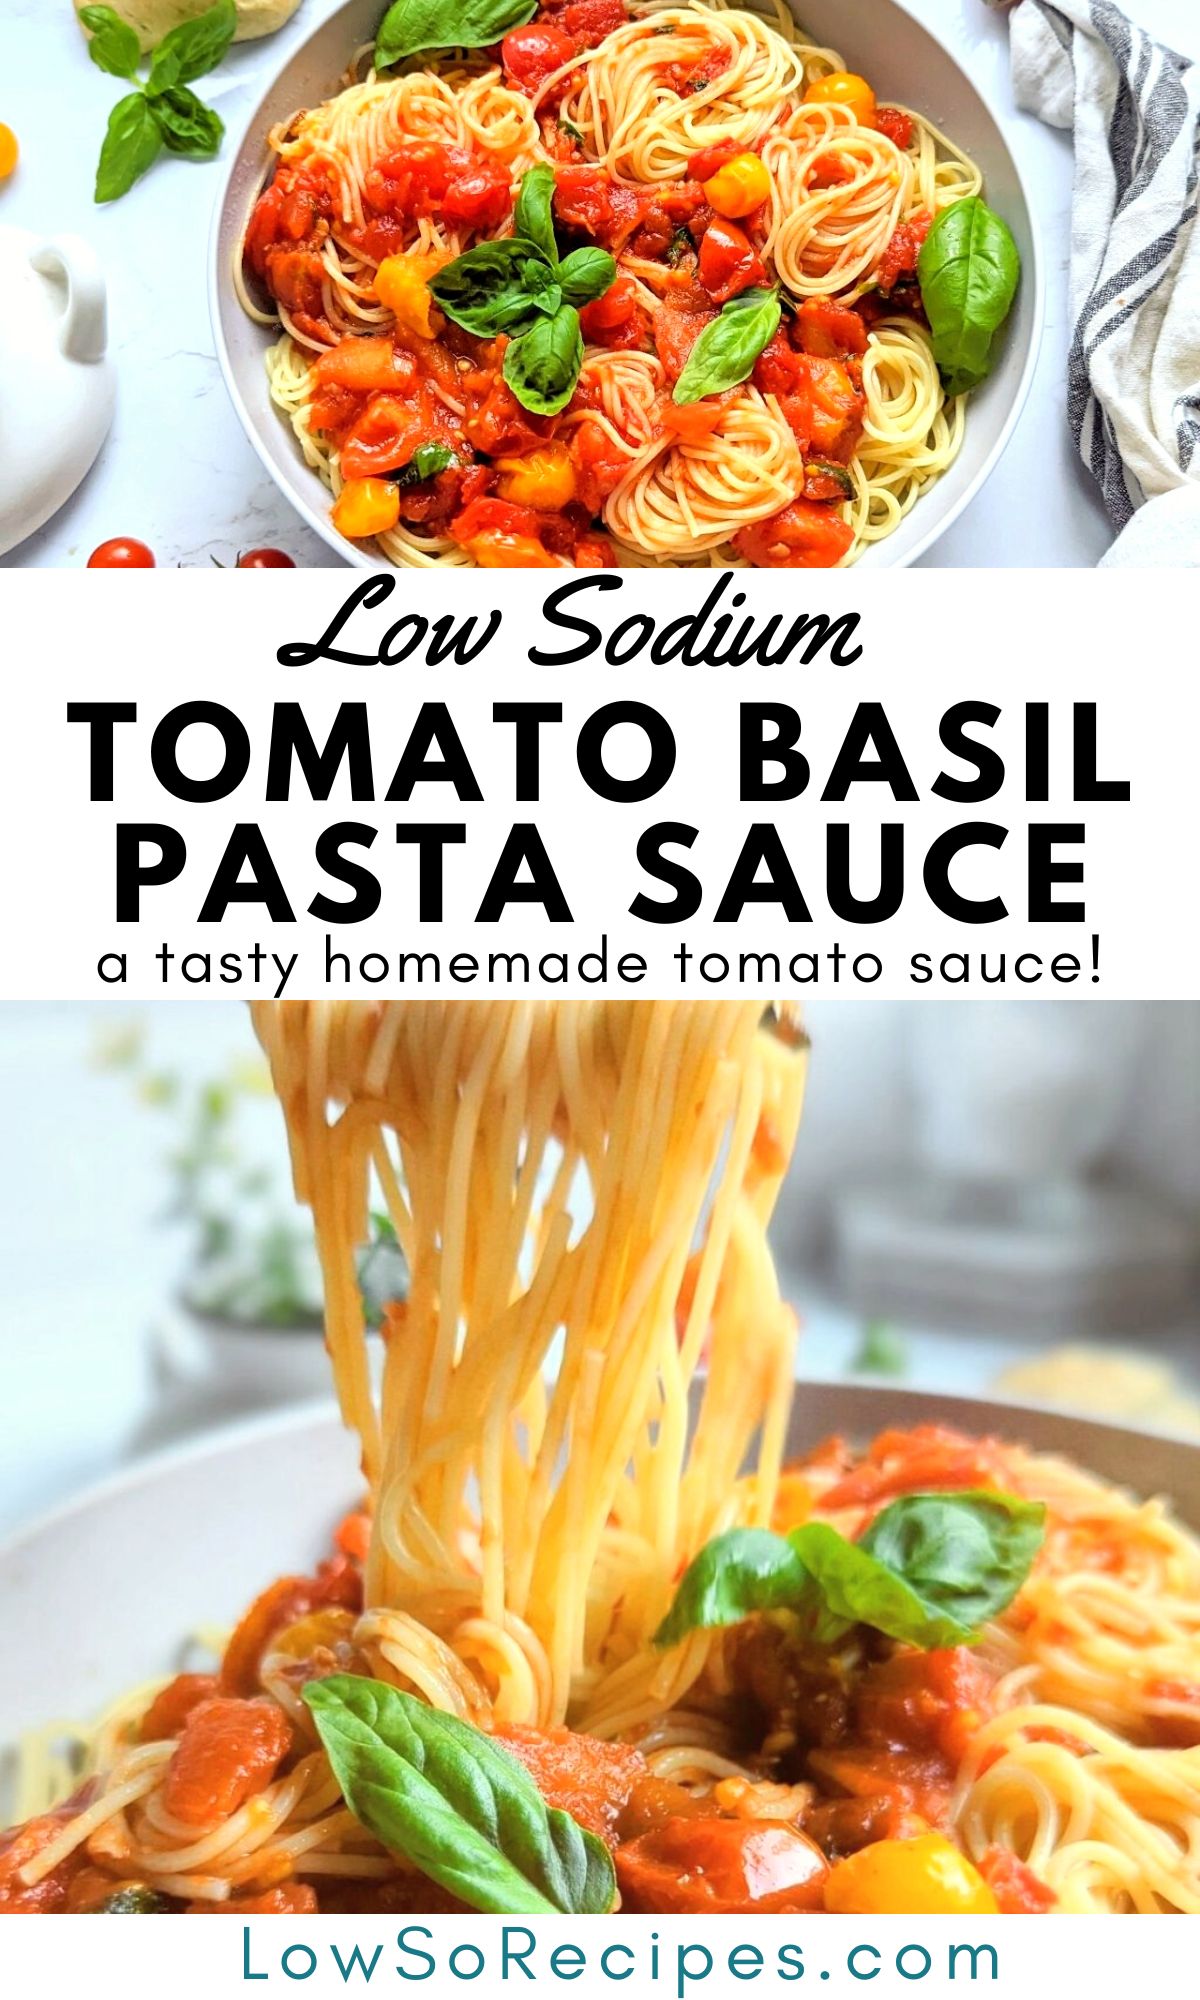 low sodium tomato basil sauce recipe no salt added pasta sauce with fresh and canned tomatoes unsalted butter and fresh basil leaves